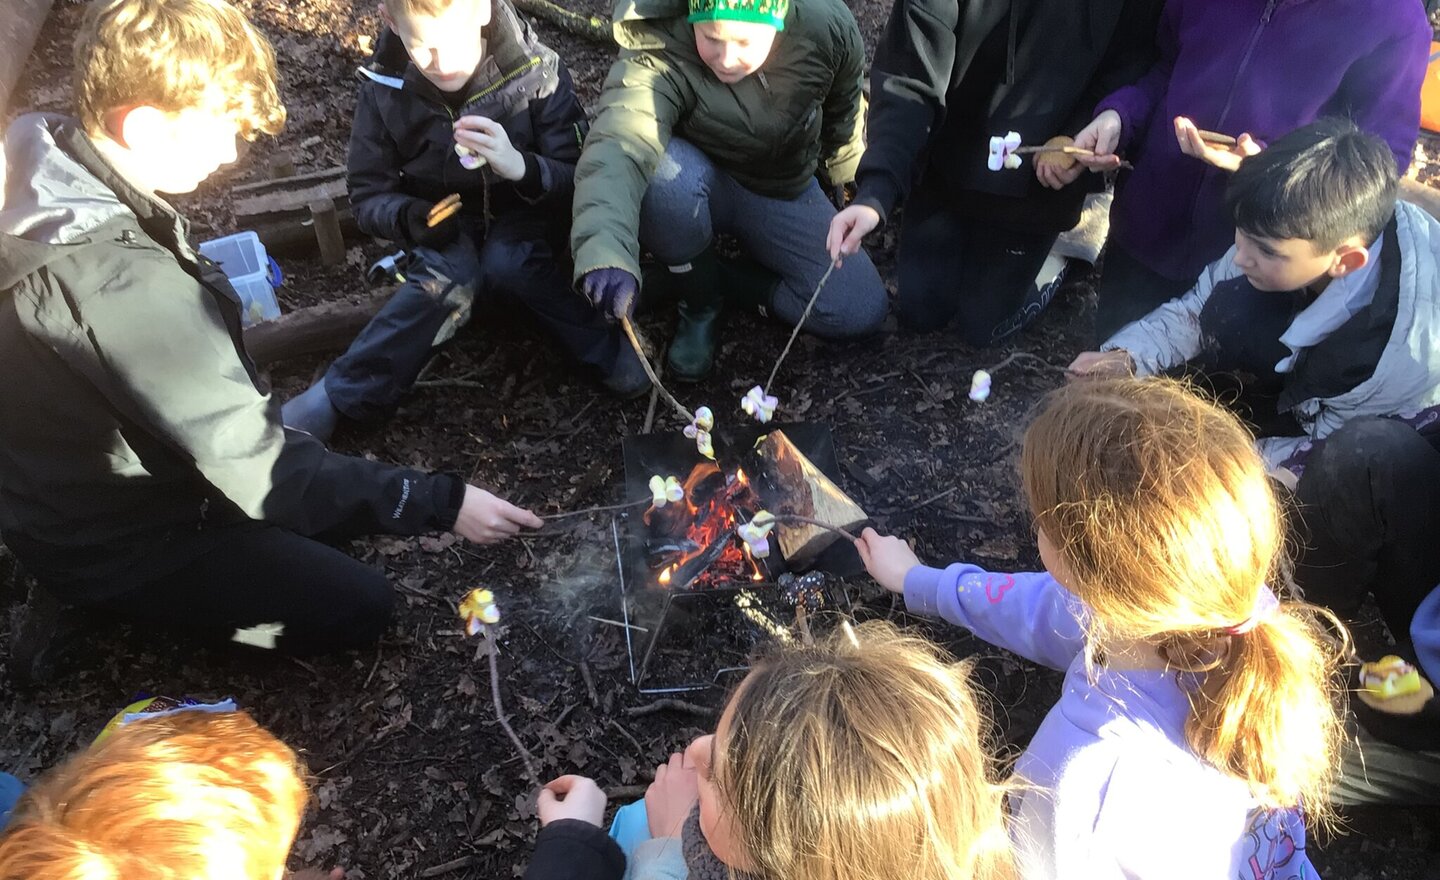 Image of S’mores Round The Fire at Forest School